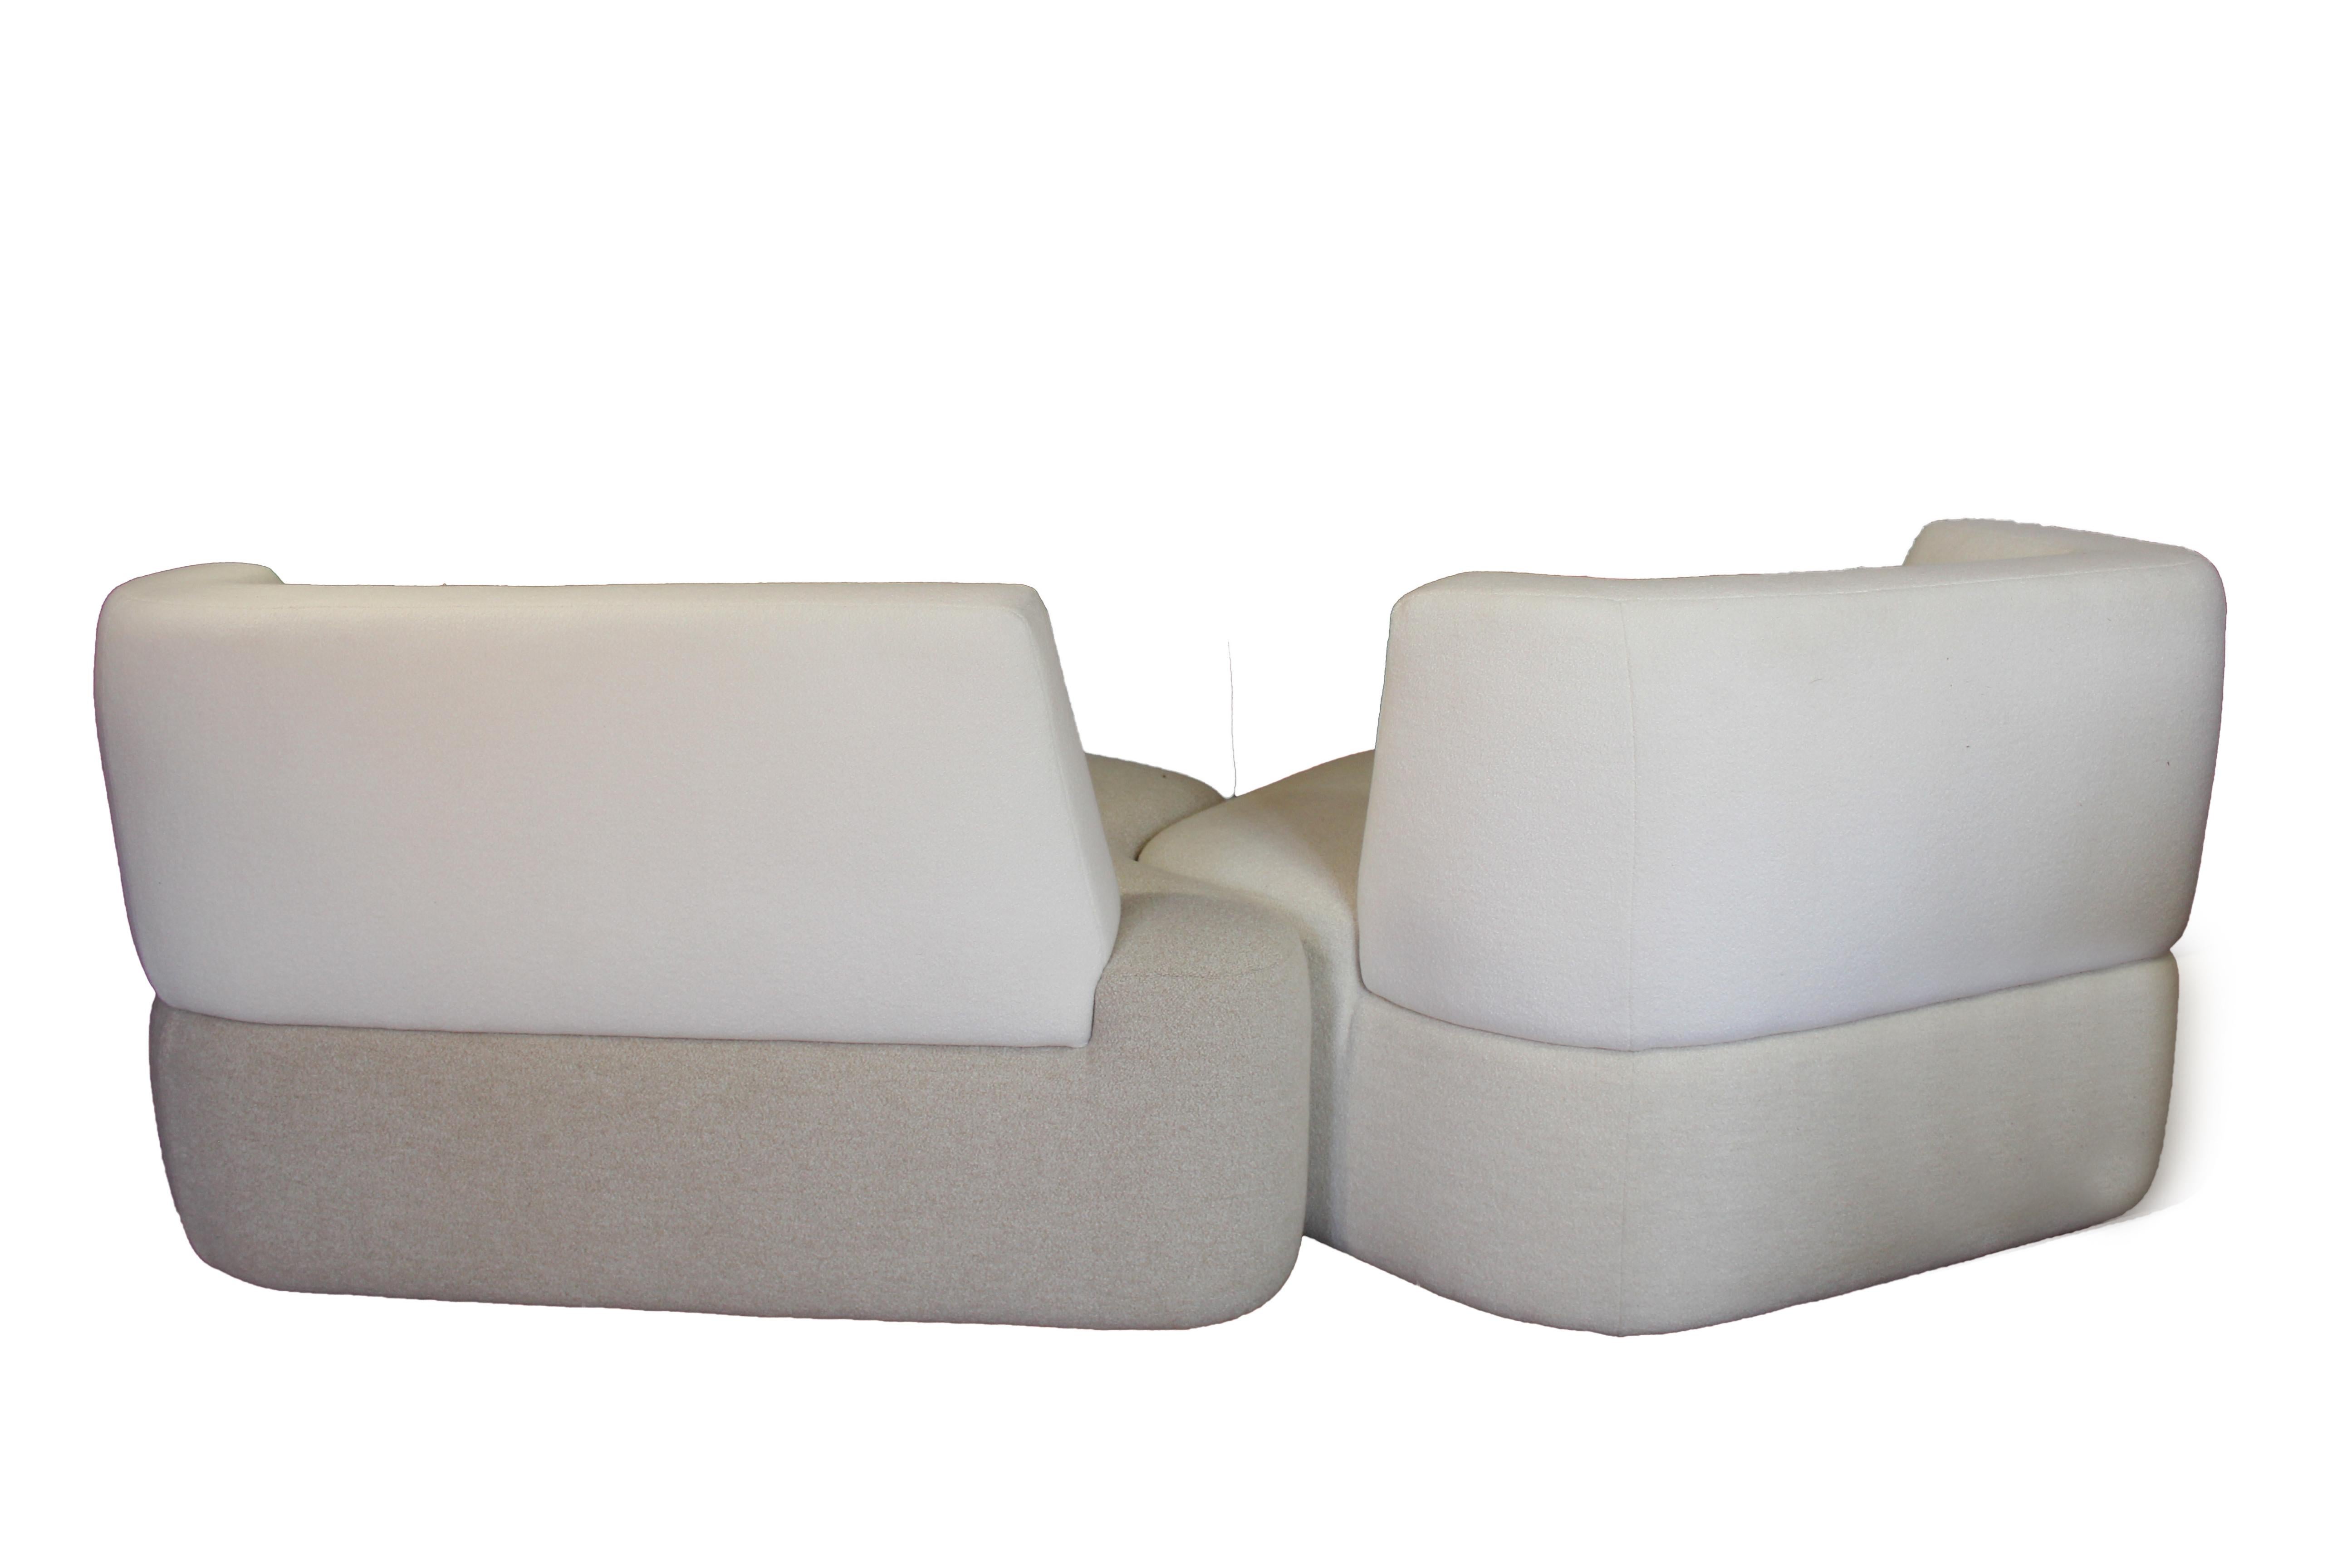 Hand-Crafted Handmad Organic Sofa in White Cream Wool 2 Modules by Eric Gizard in stock